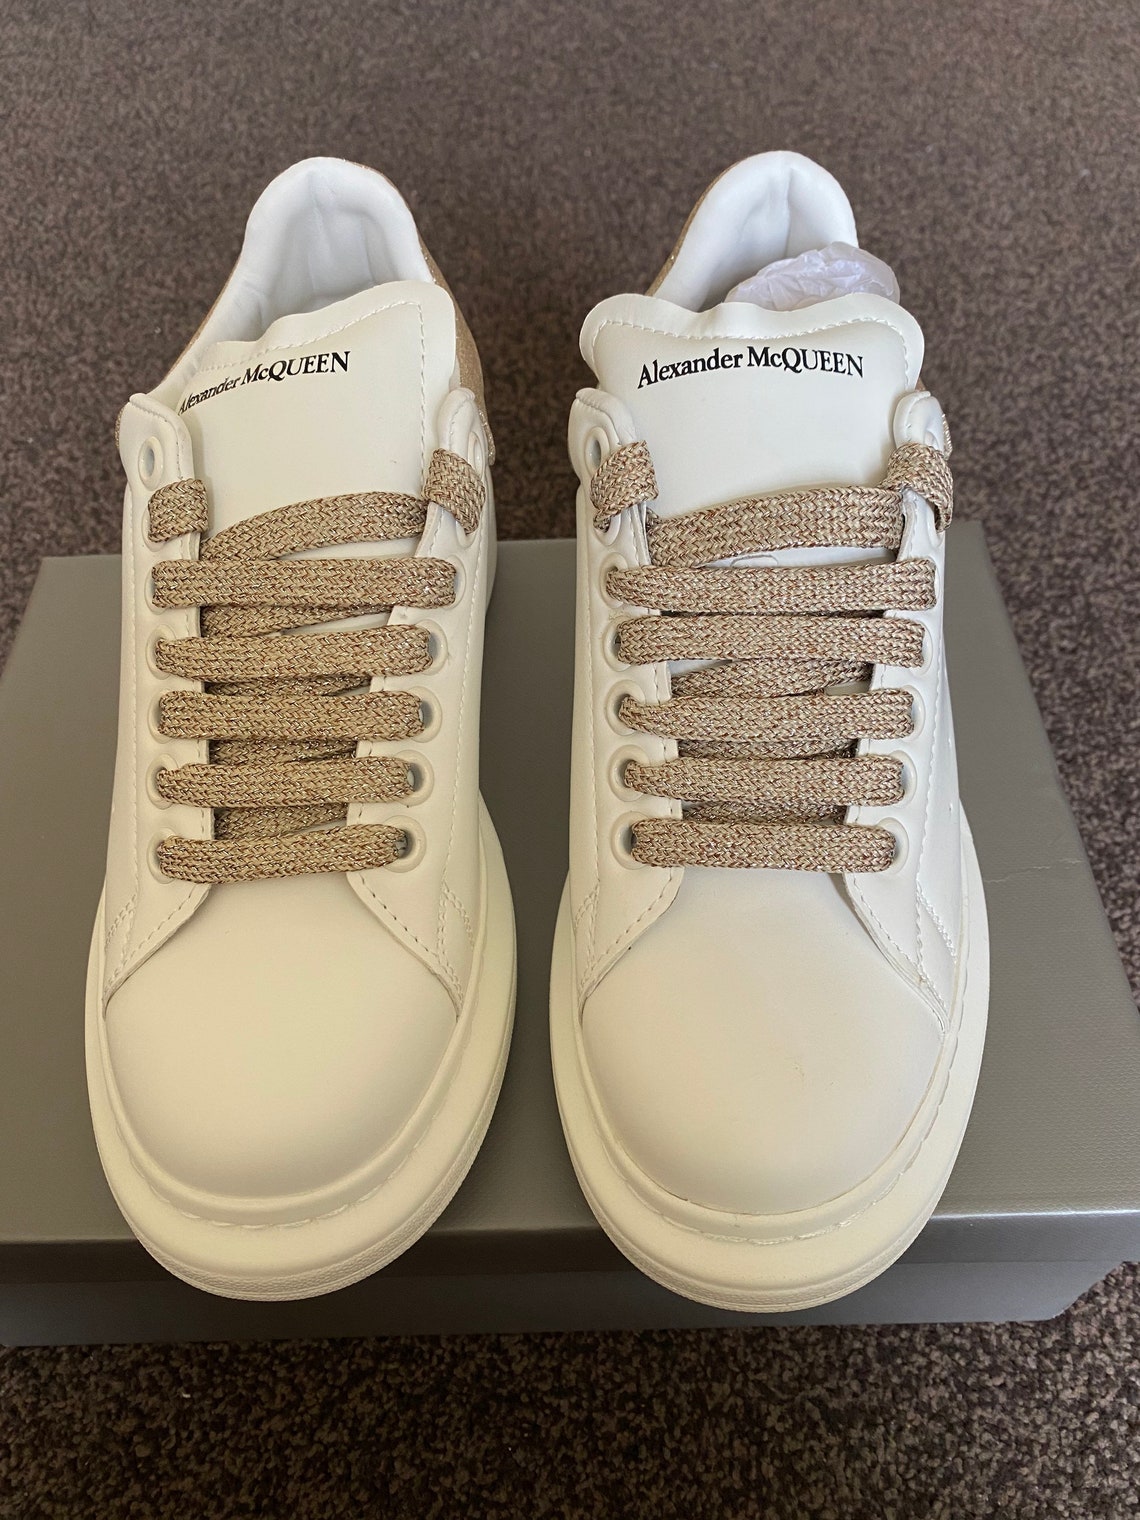 Alexander McQueen Sneakers Gold/Shiny Available in Uk Sizes | Etsy